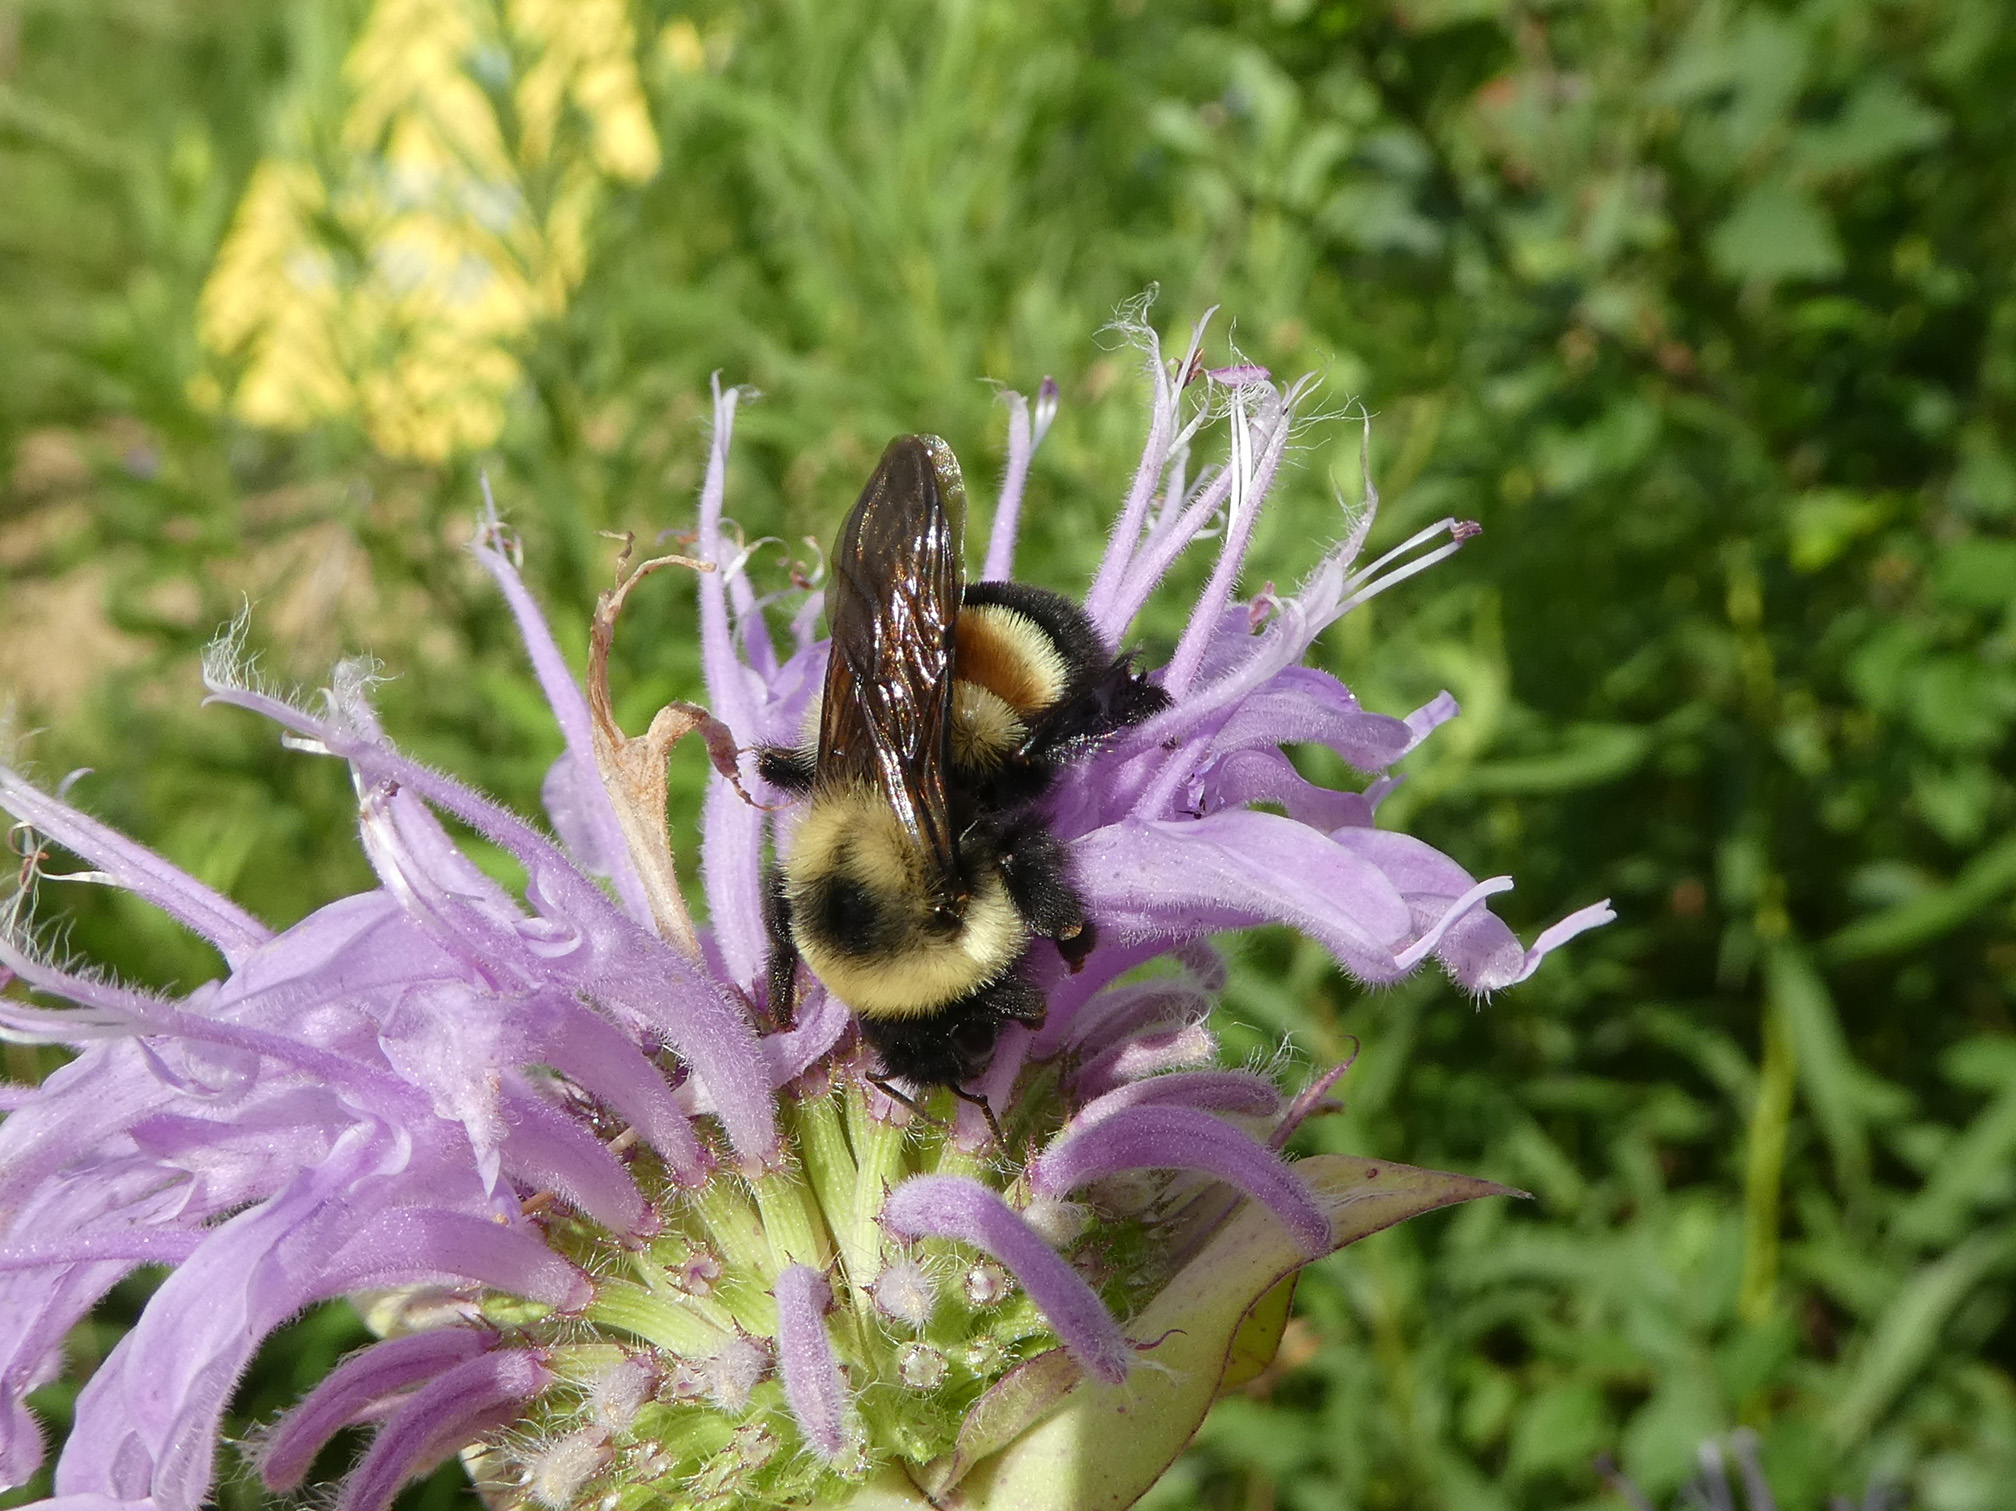 A bumble bee on a purple flower. The plant has long tubular flowers, and the bumble bee has to work hard to reach the nectar. The bumble bee has yellow and black stripes, and a distinctive rusty-brown patch on its back. 